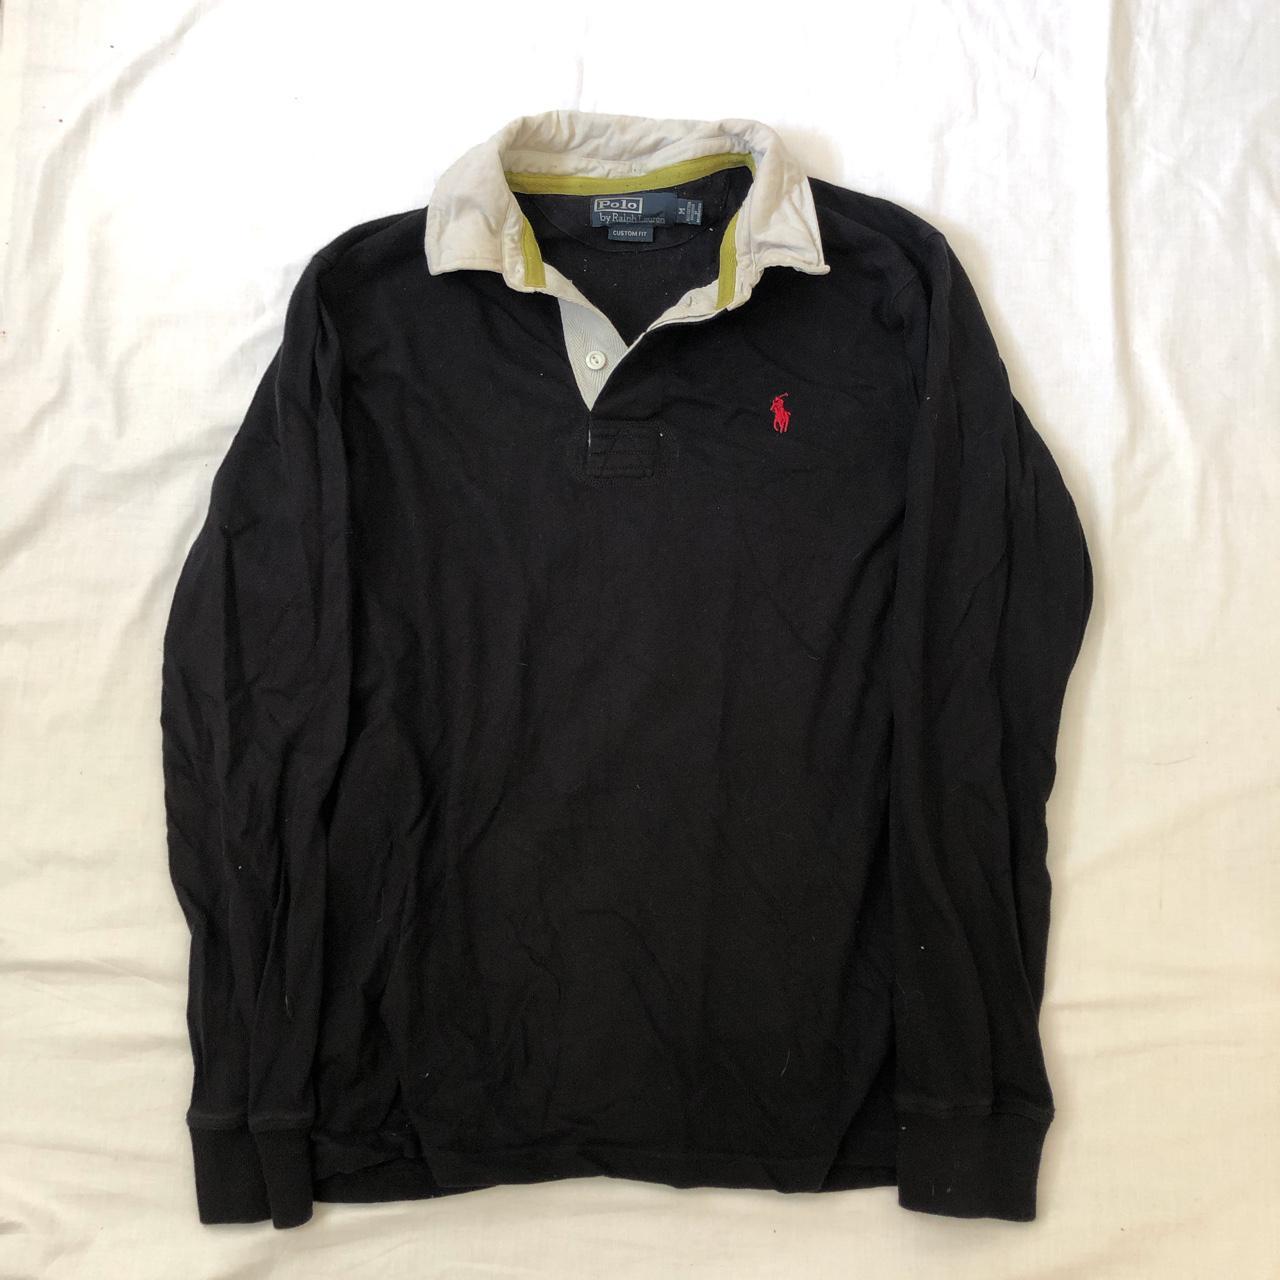 Selling fast atm the Ralph Lauren rugby shirts are a... - Depop